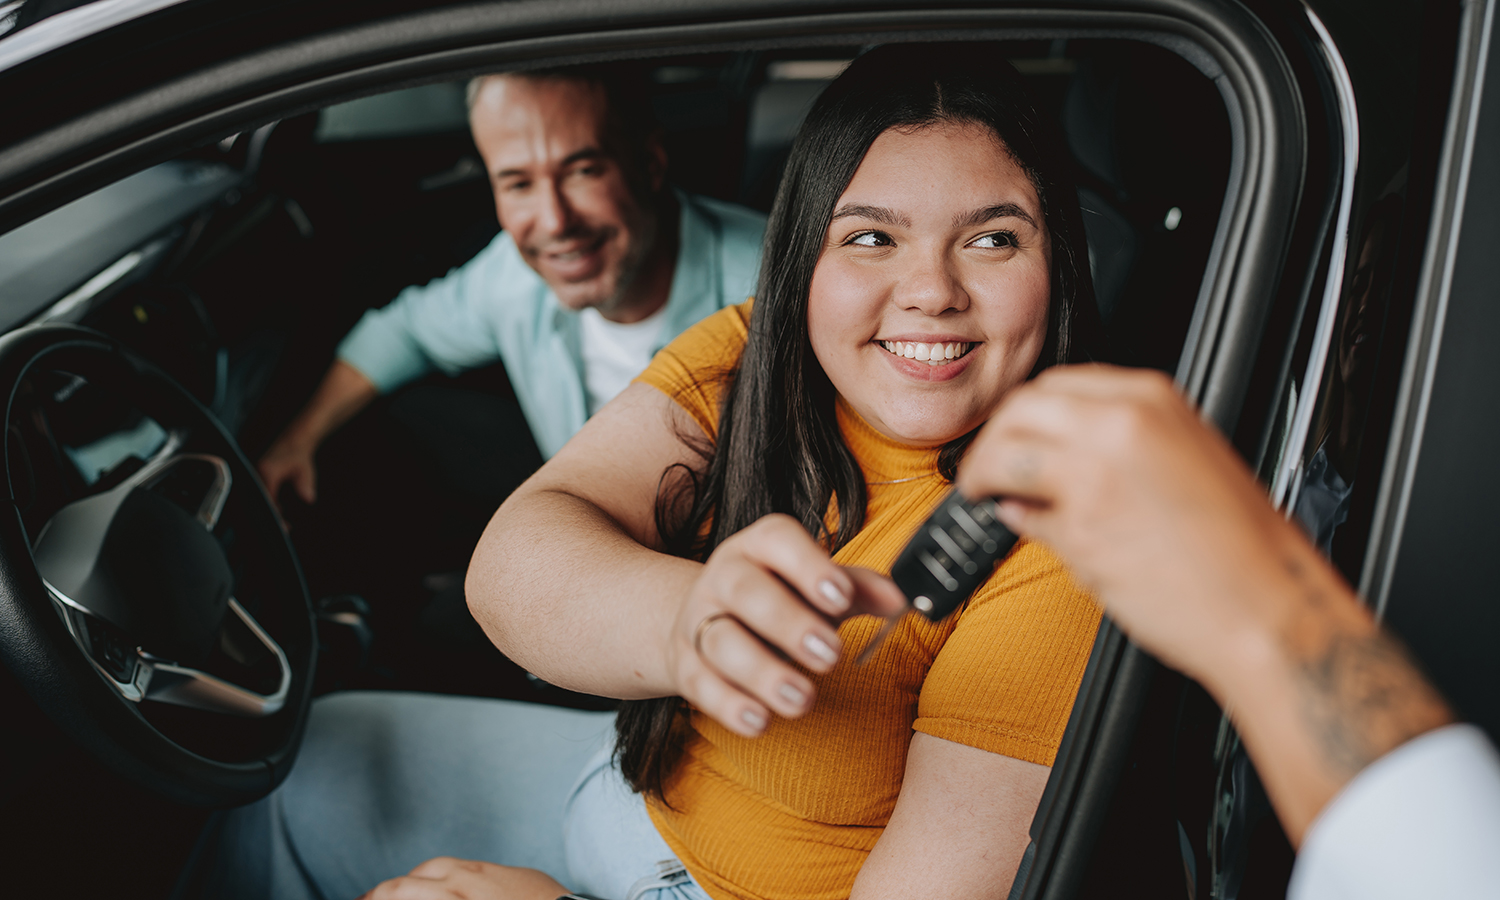 Teenage girl getting keys to drive a car while dad sits in passenger seat